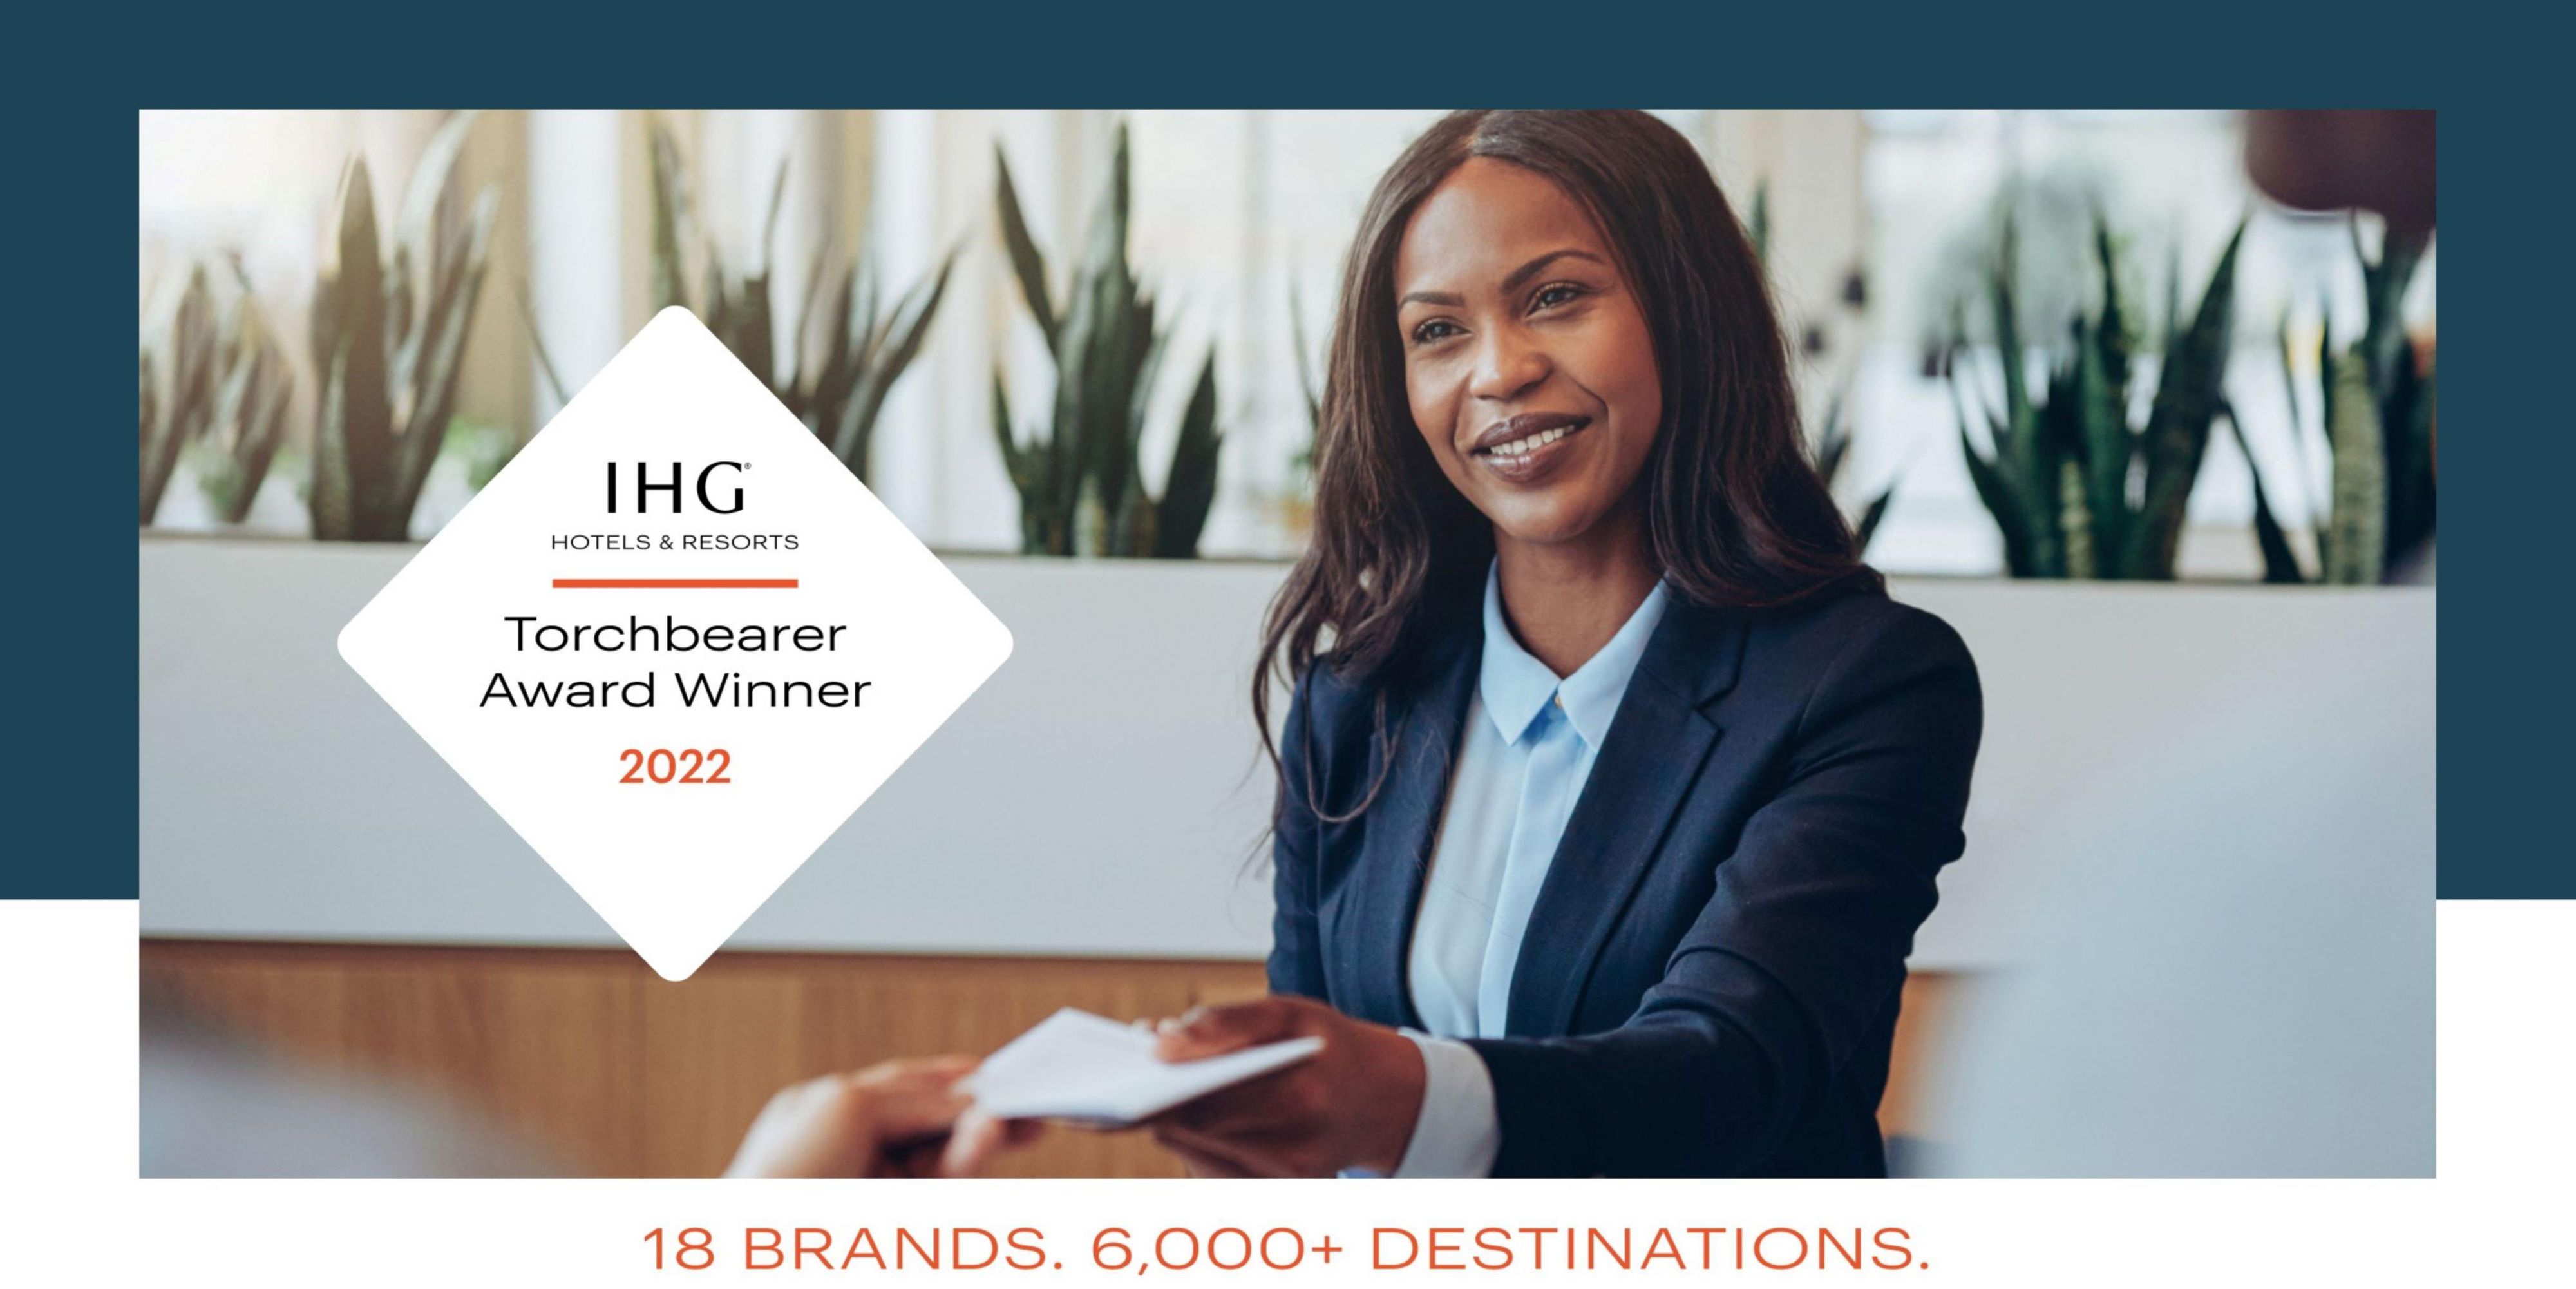 Because of you... Recent 2022 Torch Bearer Award winner for Outstanding Customer Service, Cleanliness and Satisfaction! Let us be the superhero you deserve! Book now.